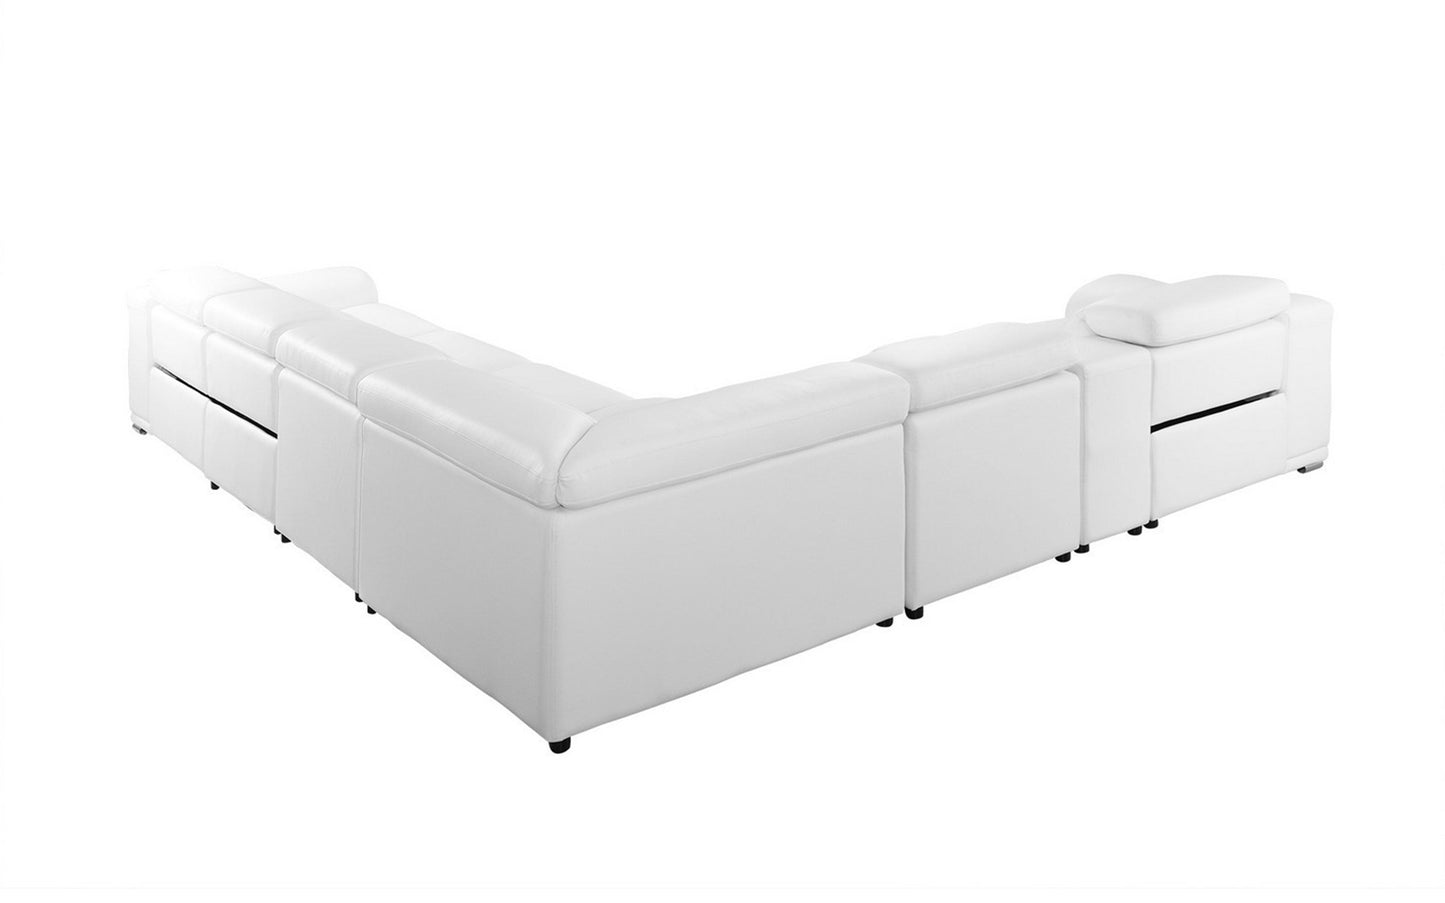 Logan 8pc Cream Modern Sectional with Recliner